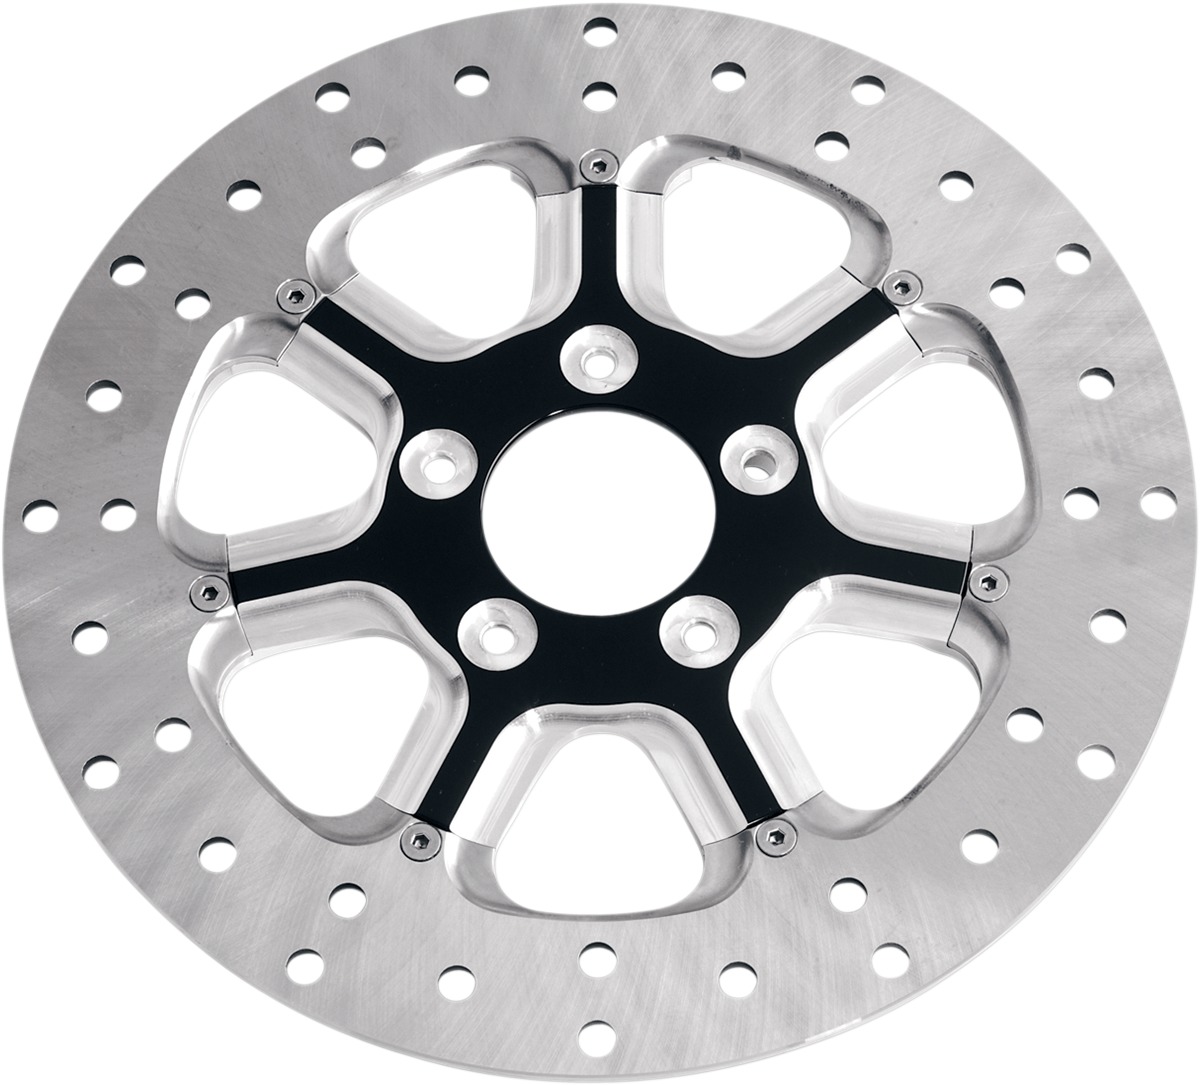 Diesel Floating Front Brake Rotor 292mm Contrast Cut - For Harley - Click Image to Close